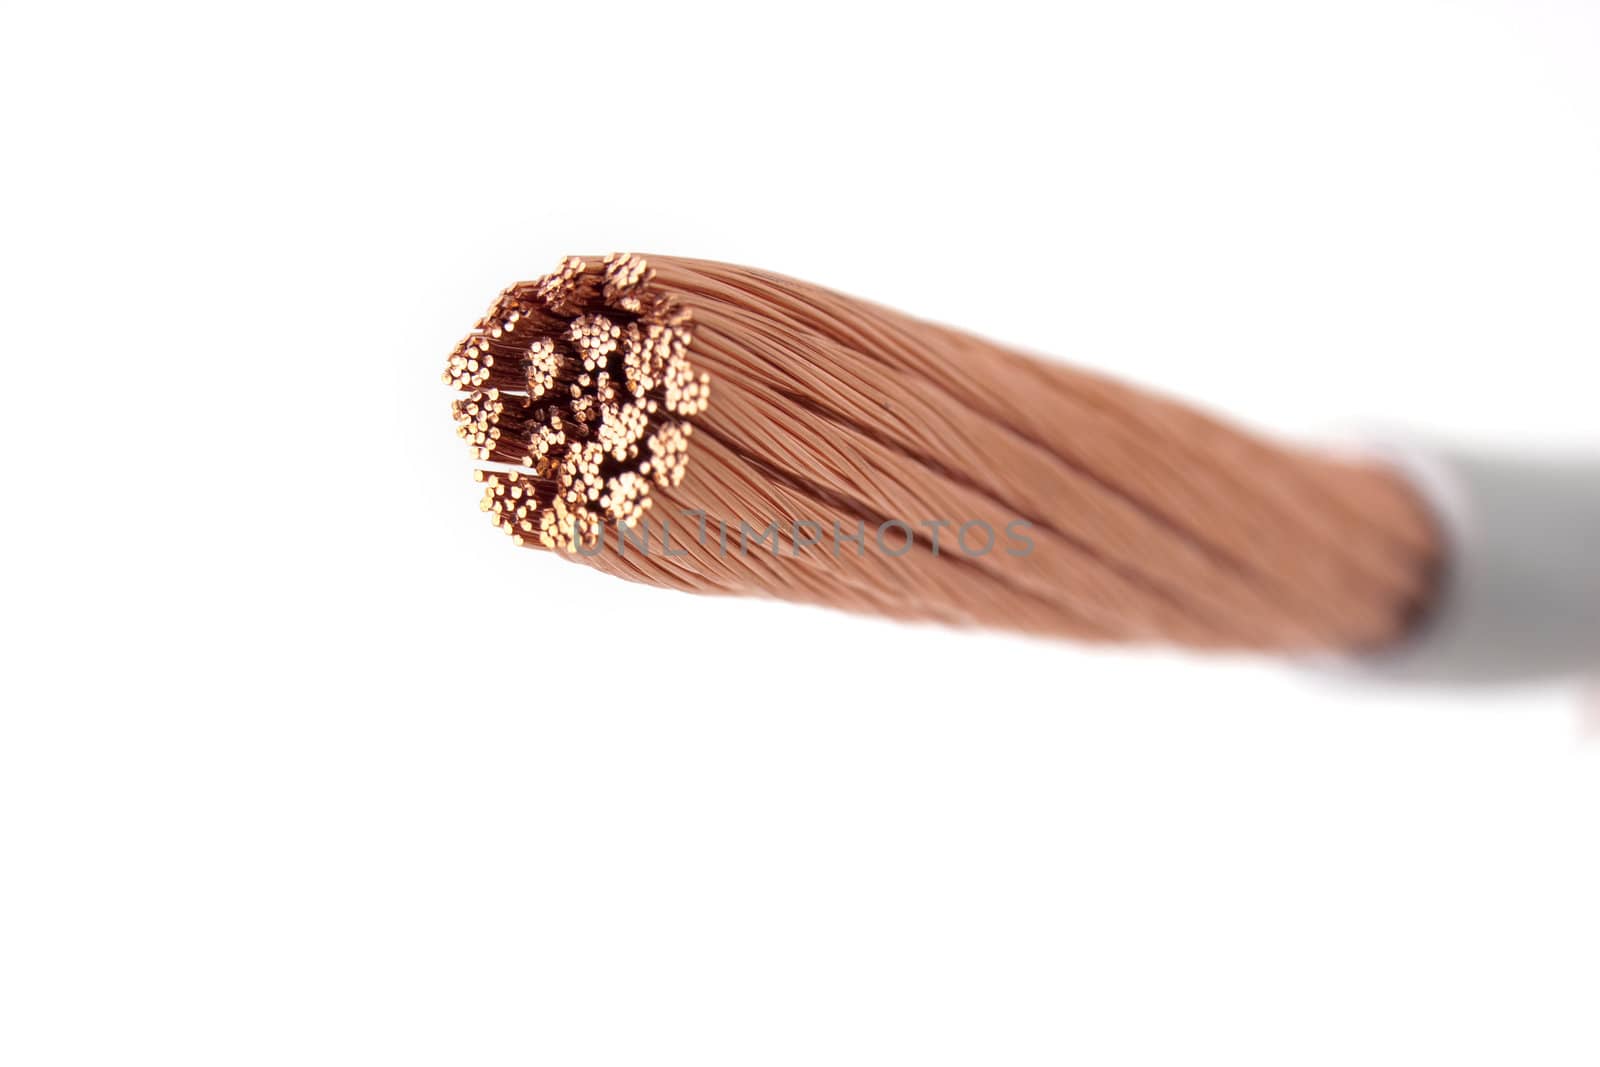 Power cable isolated on white background
